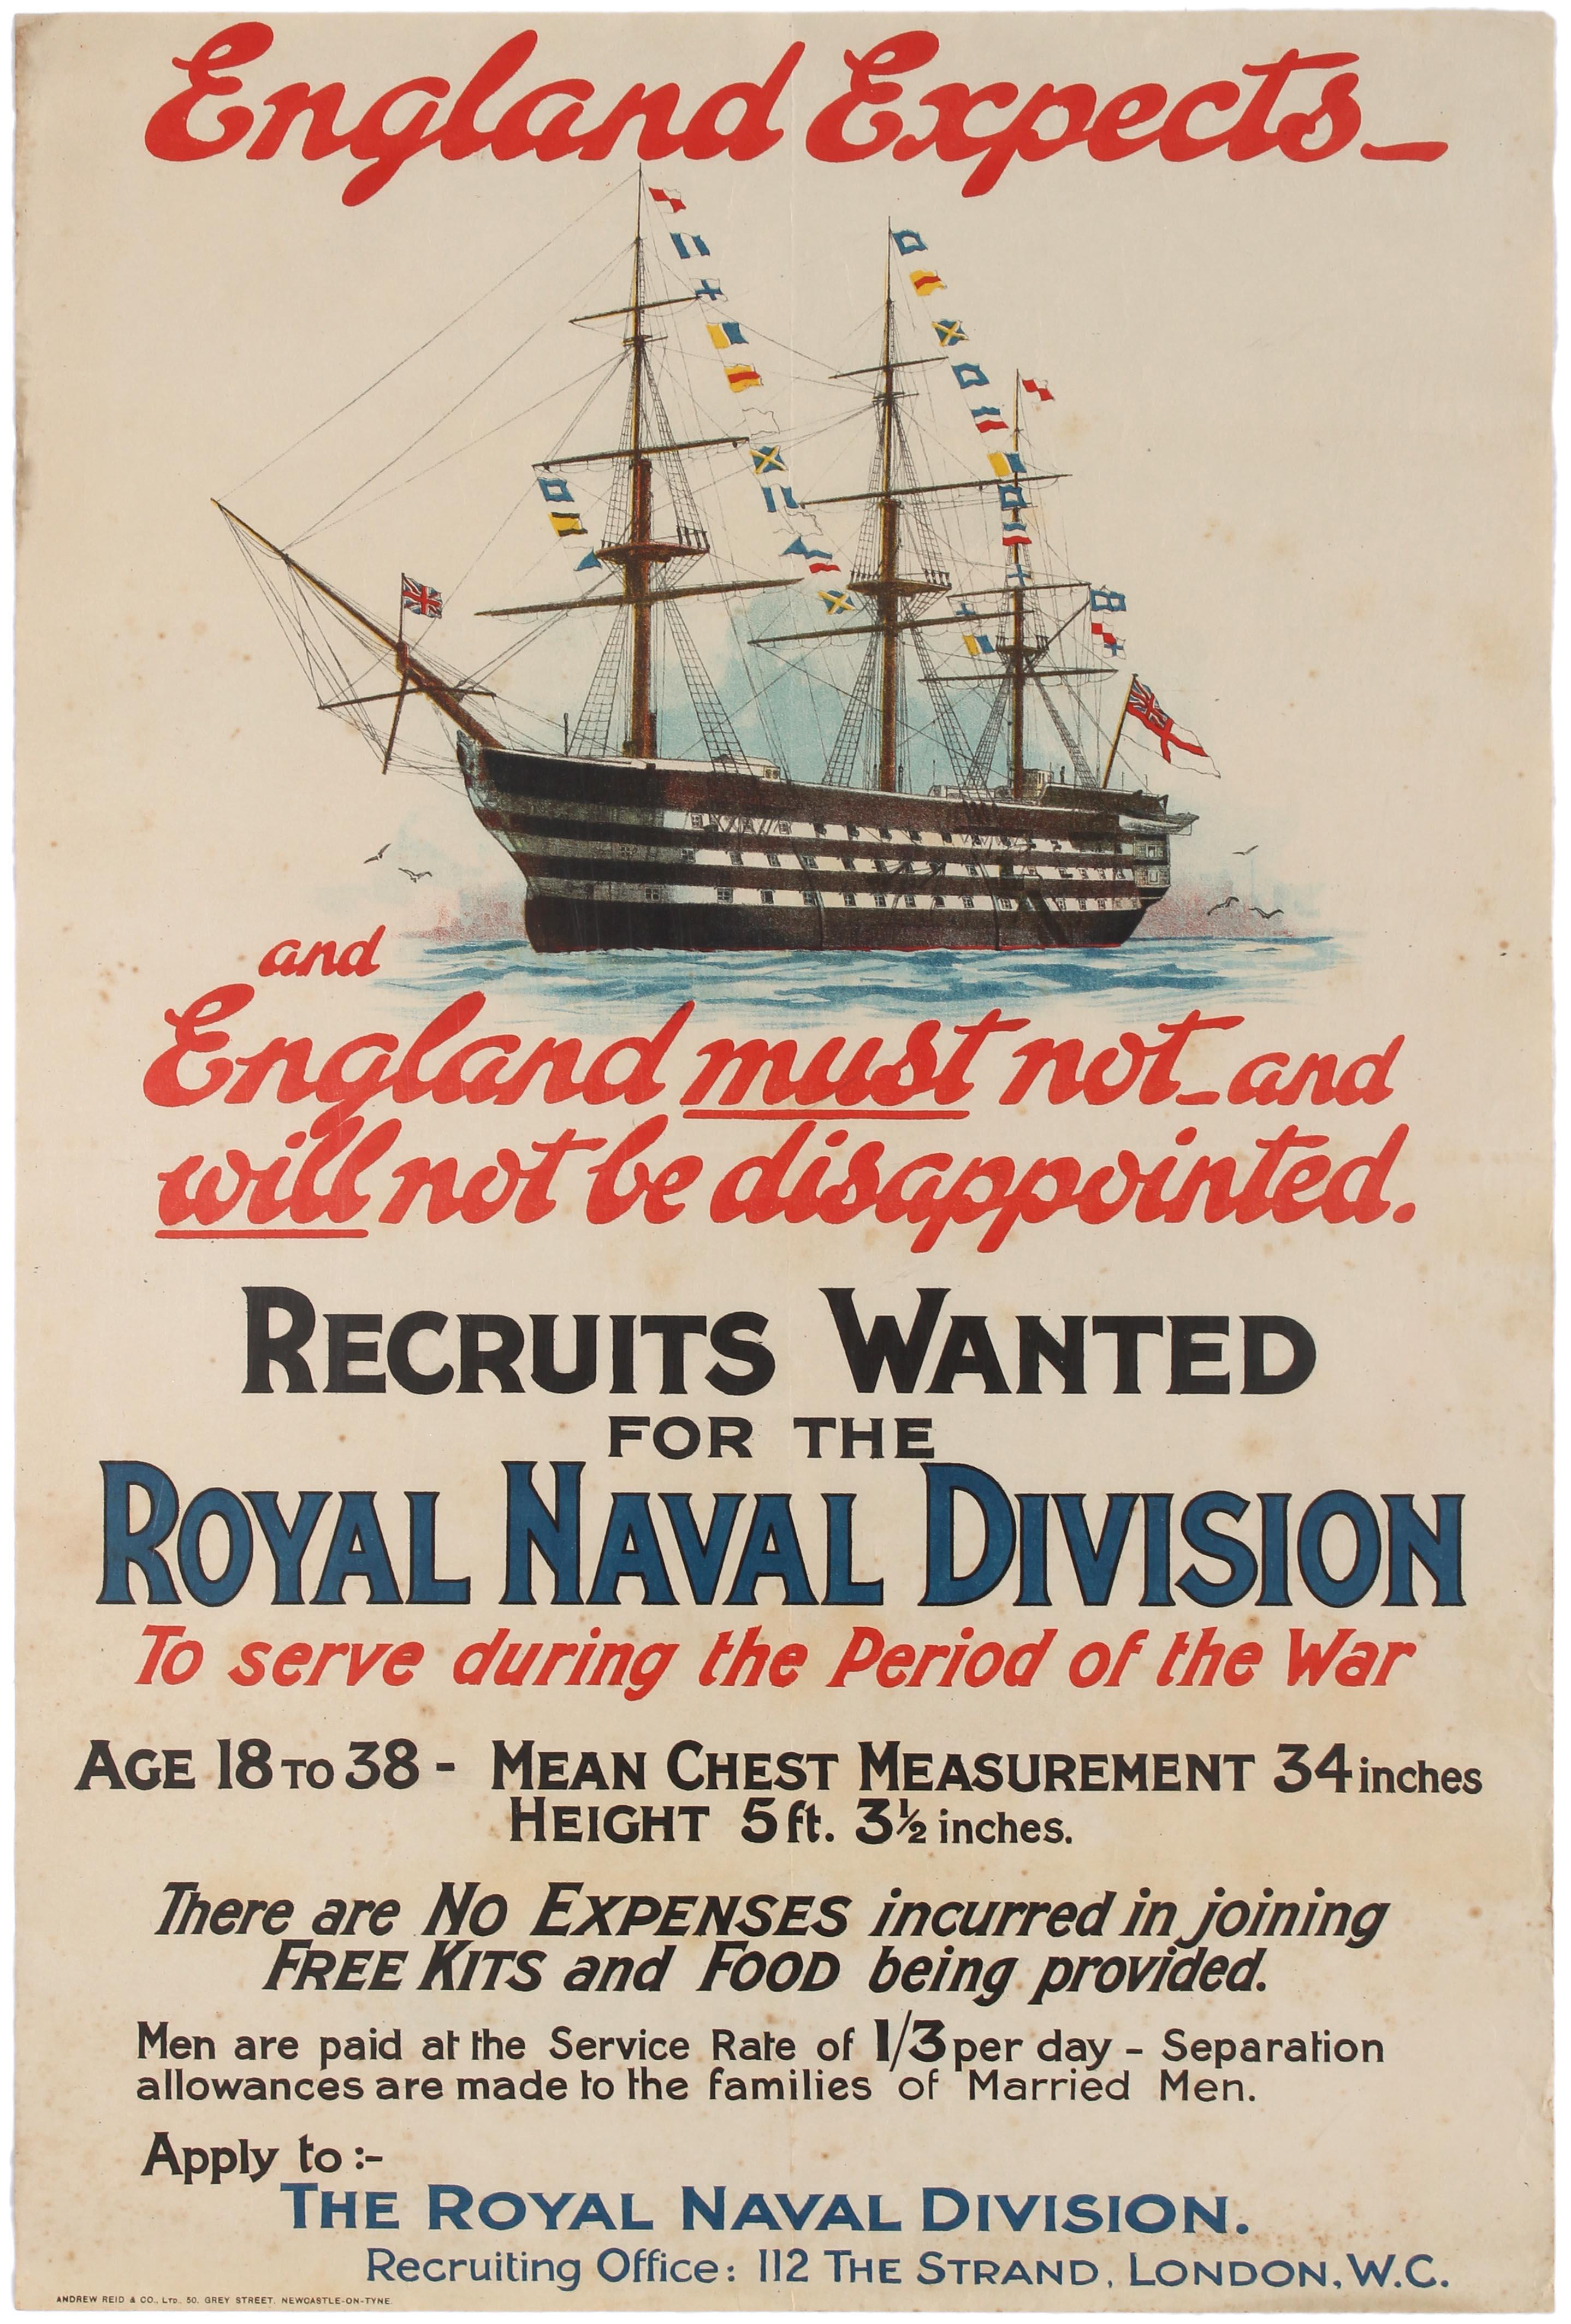 Unknown Print - Original Antique WWI Royal Navy Recruitment Poster England Expects HMS Victory 